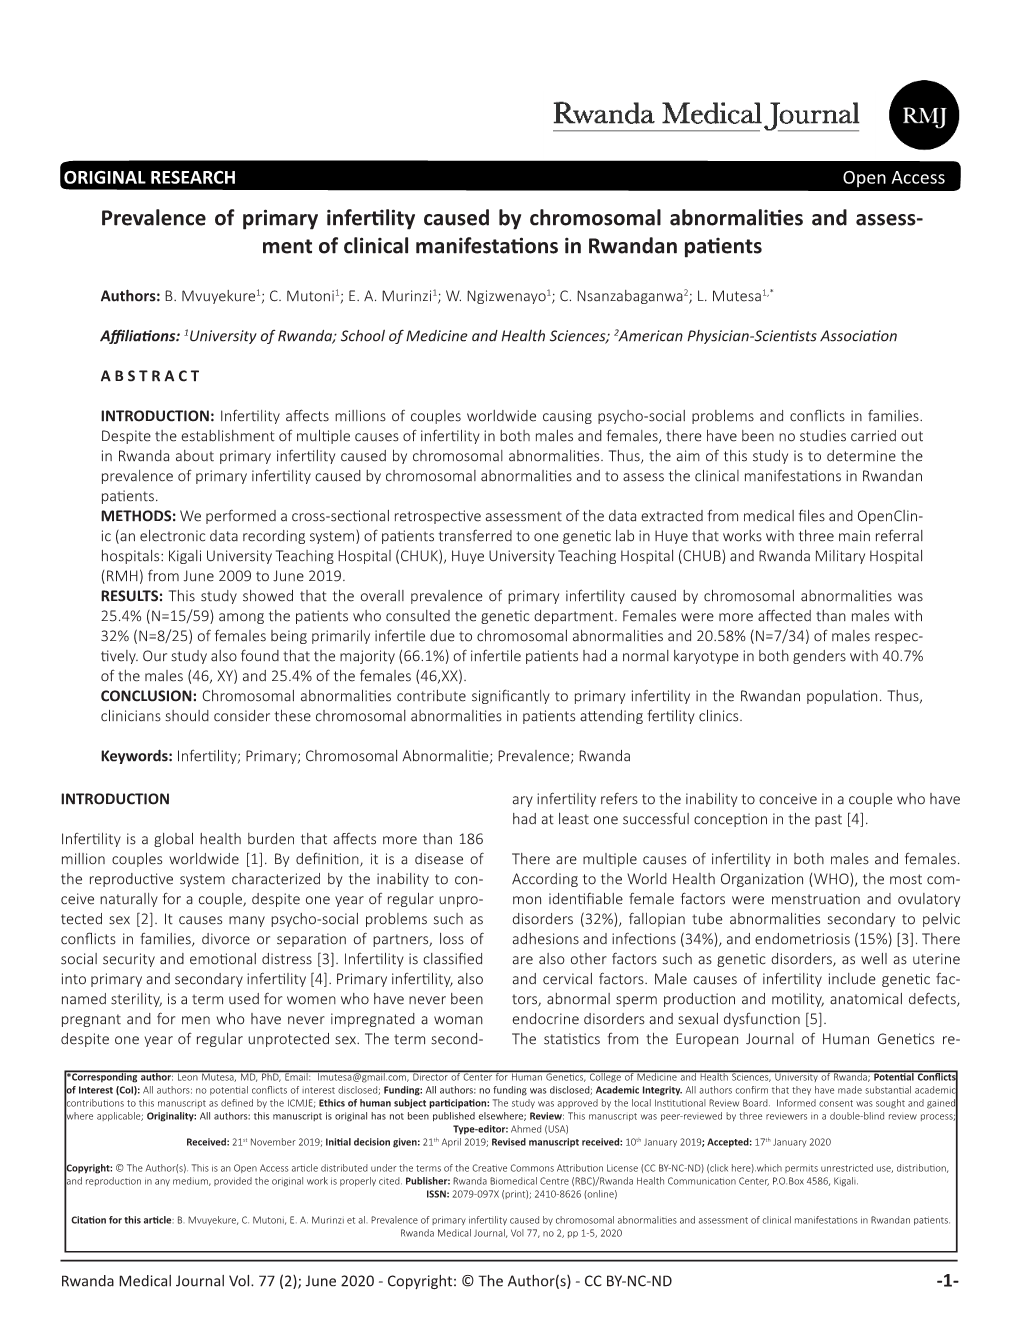 Prevalence of Primary Infertility Caused by Chromosomal Abnormalities and Assess- Ment of Clinical Manifestations in Rwandan Patients